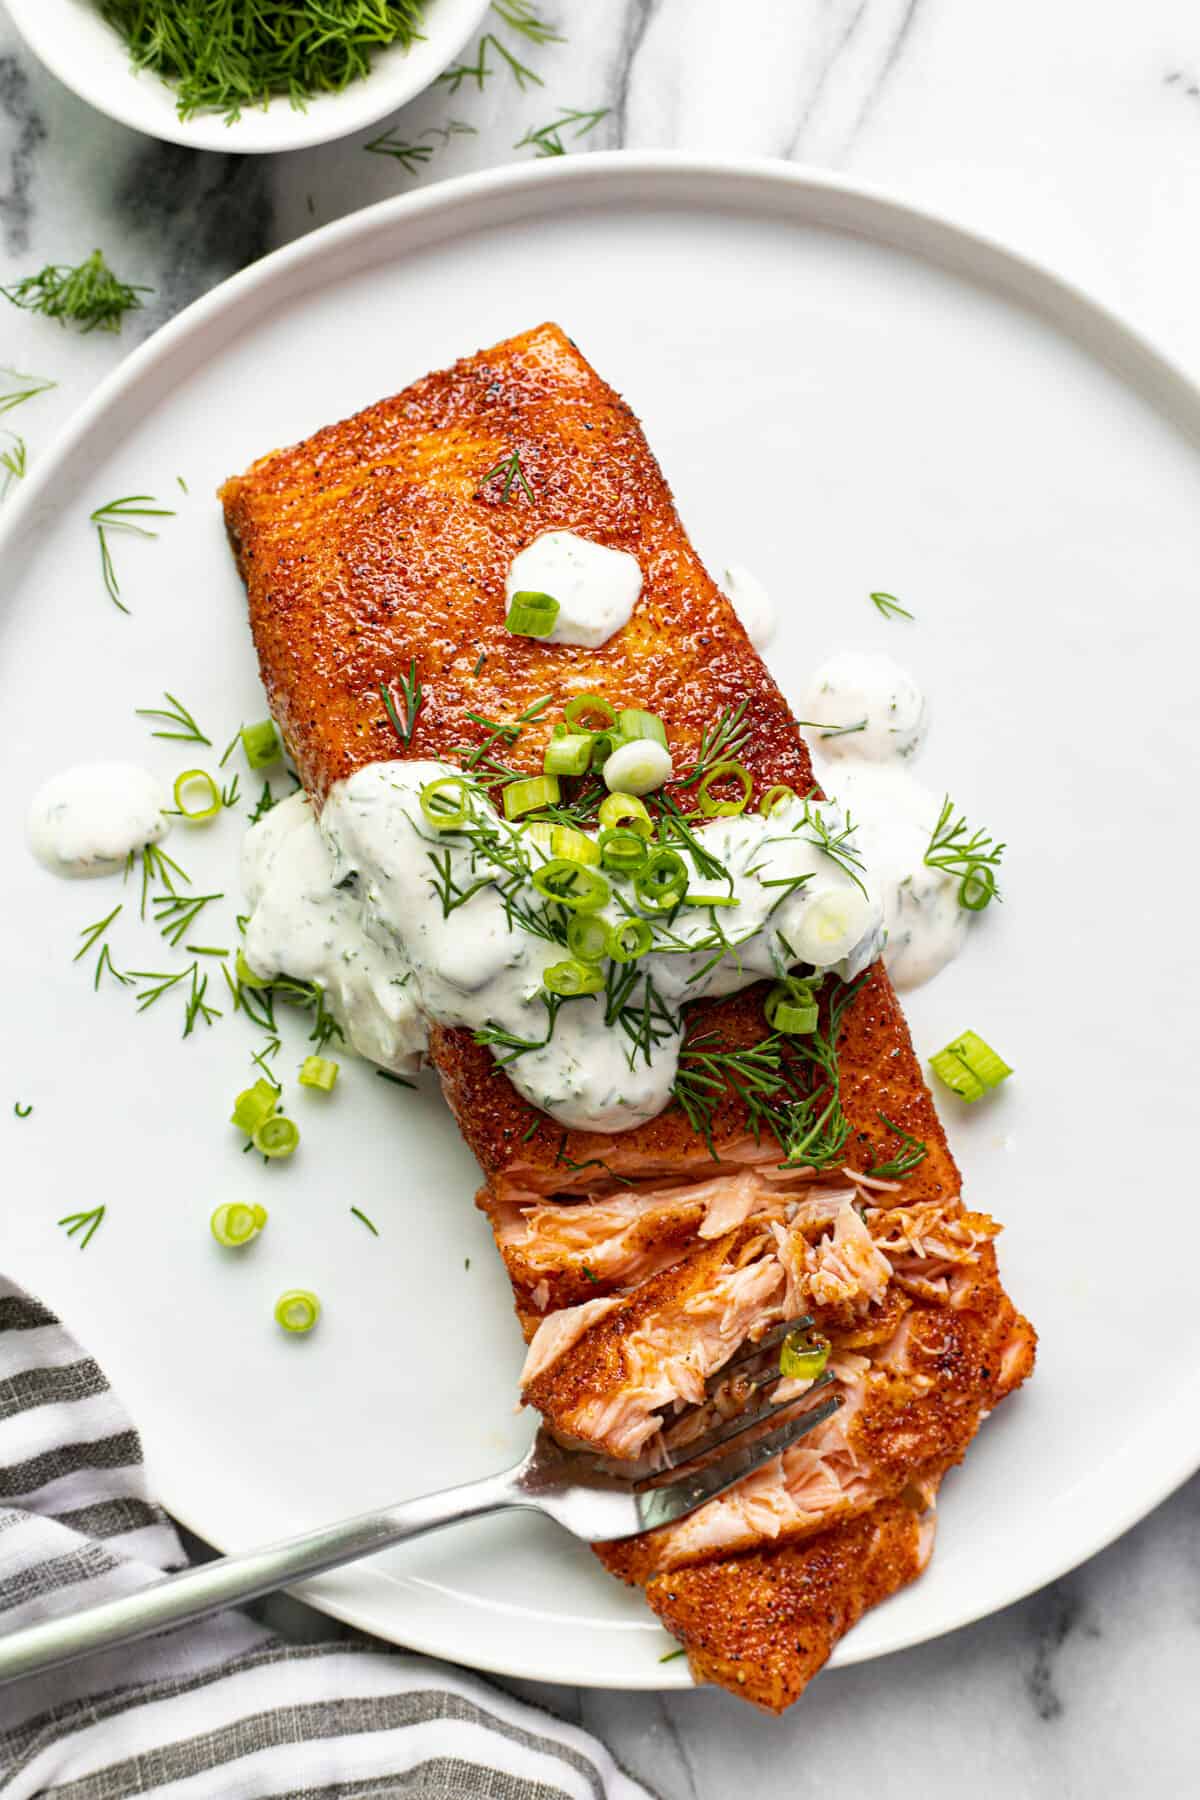 Smoked salmon on a white plate garnished with dill sauce and sliced green onions.